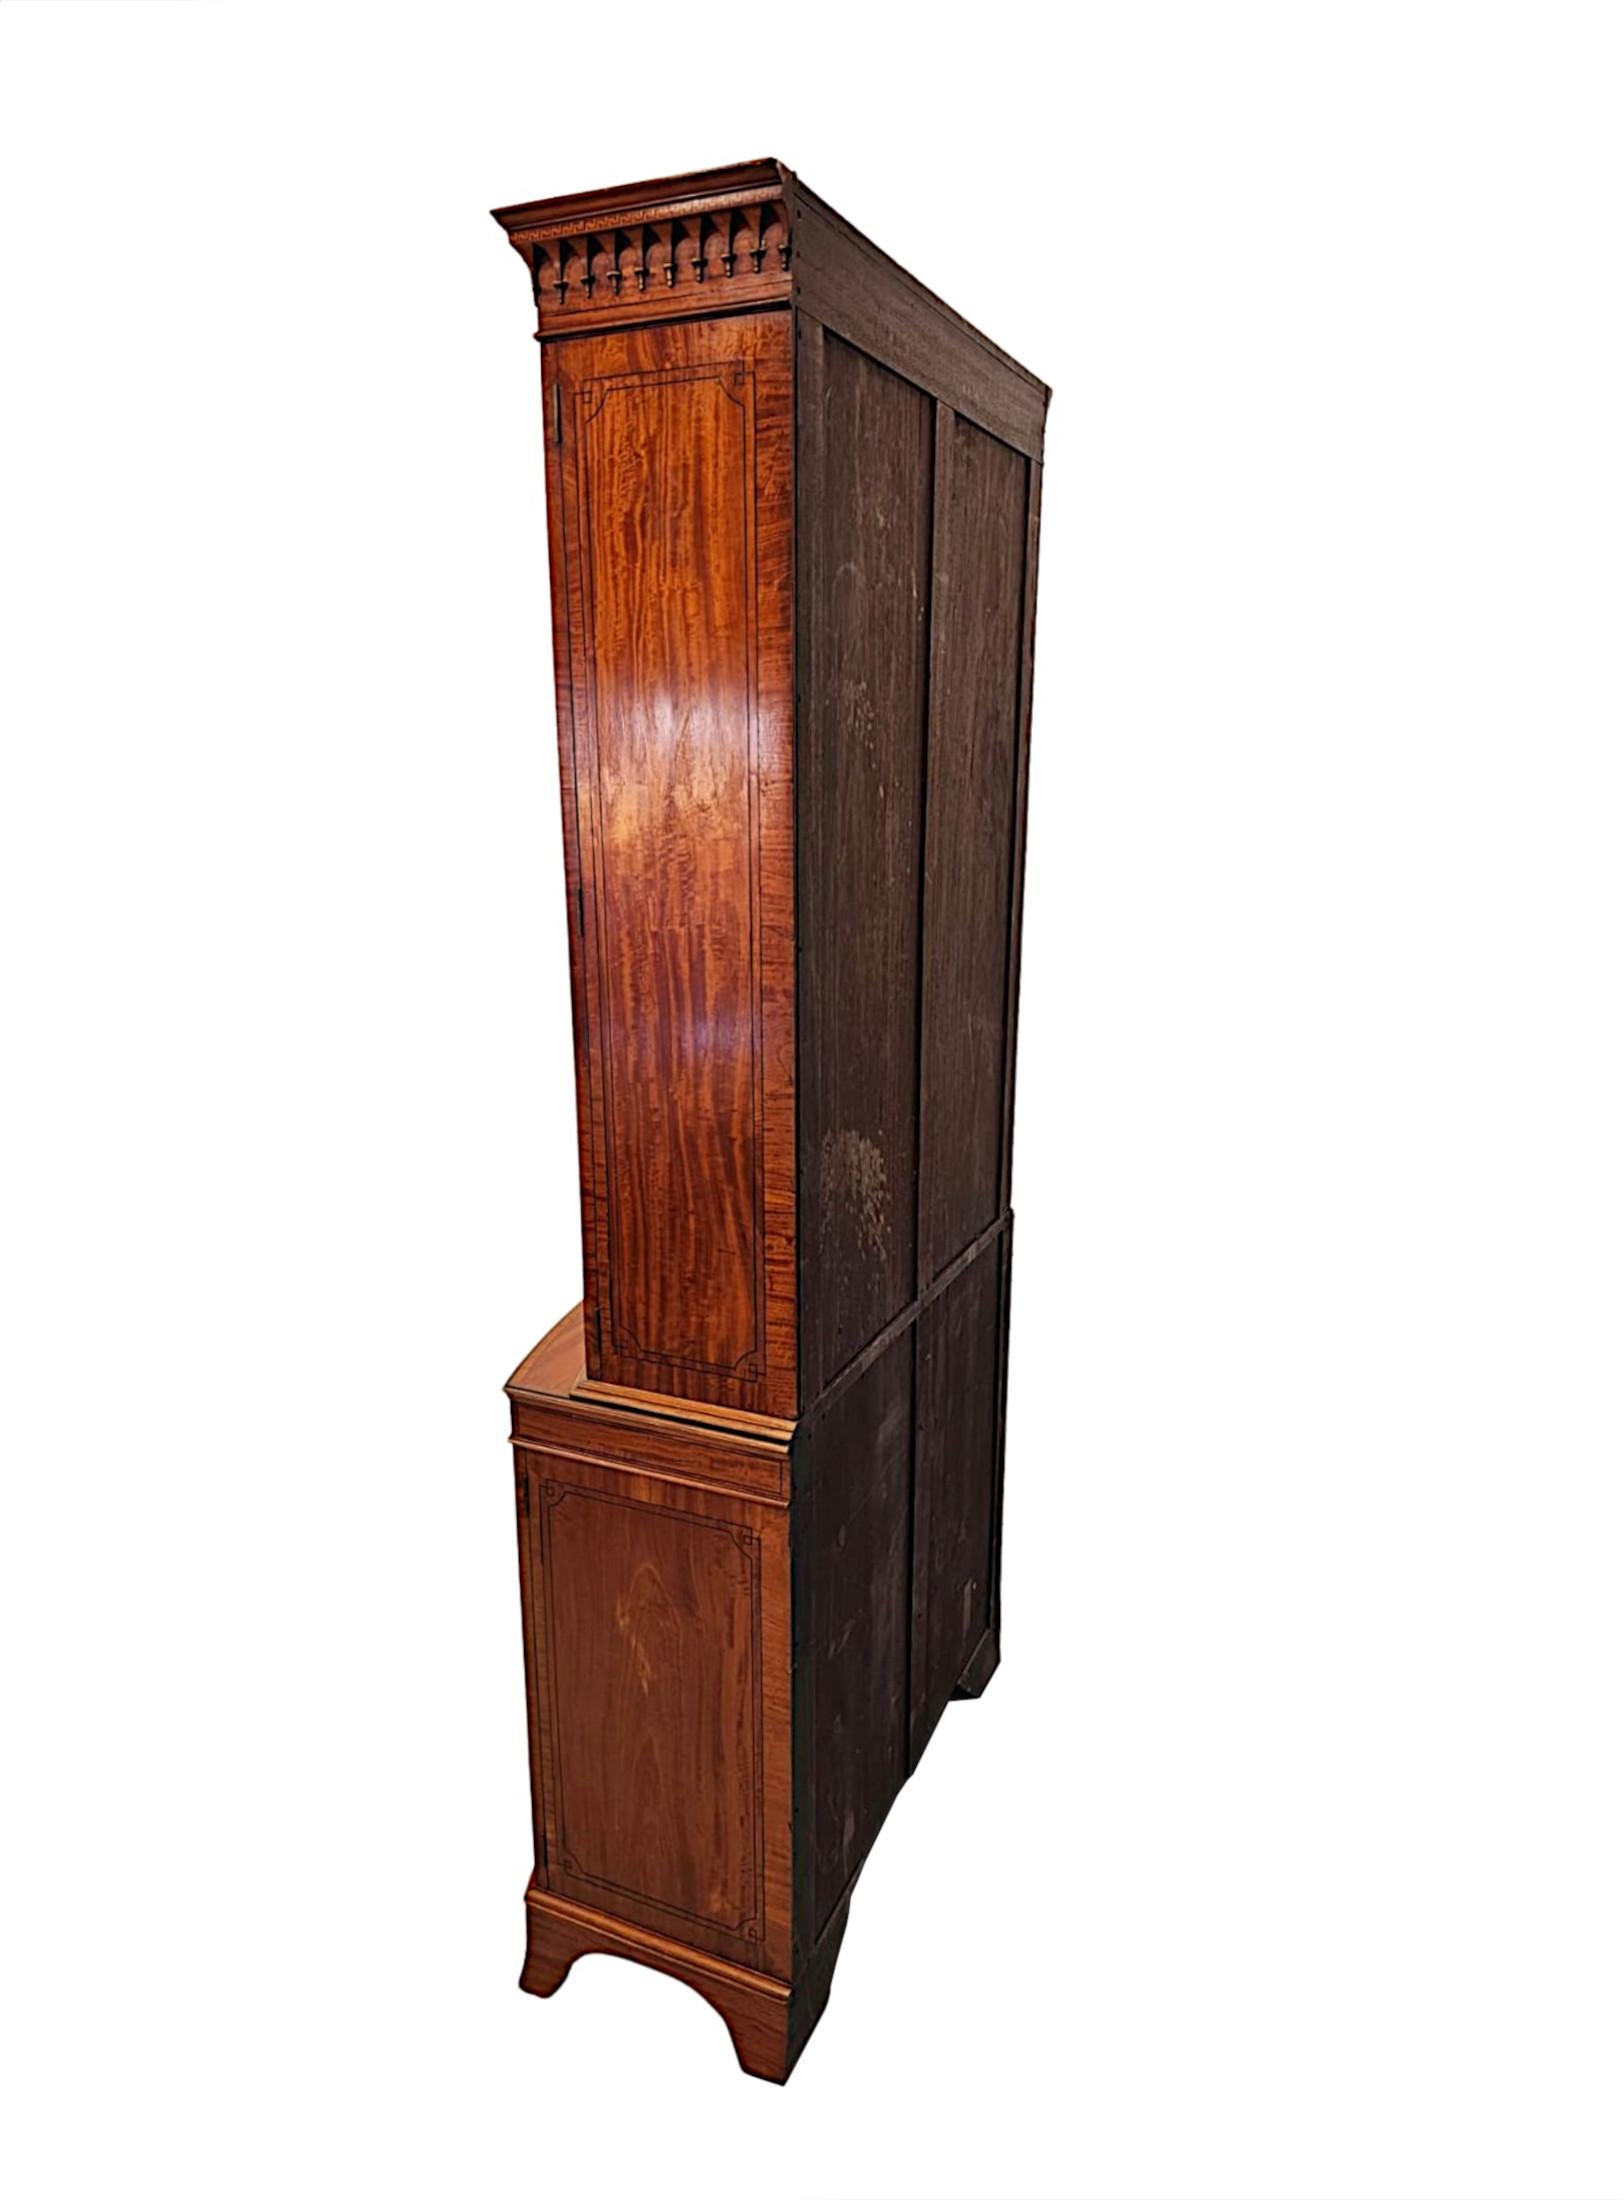 A  Fine Edwardian Marquetry Inlaid Bowfronted Bookcase afterf Edward and Roberts For Sale 6